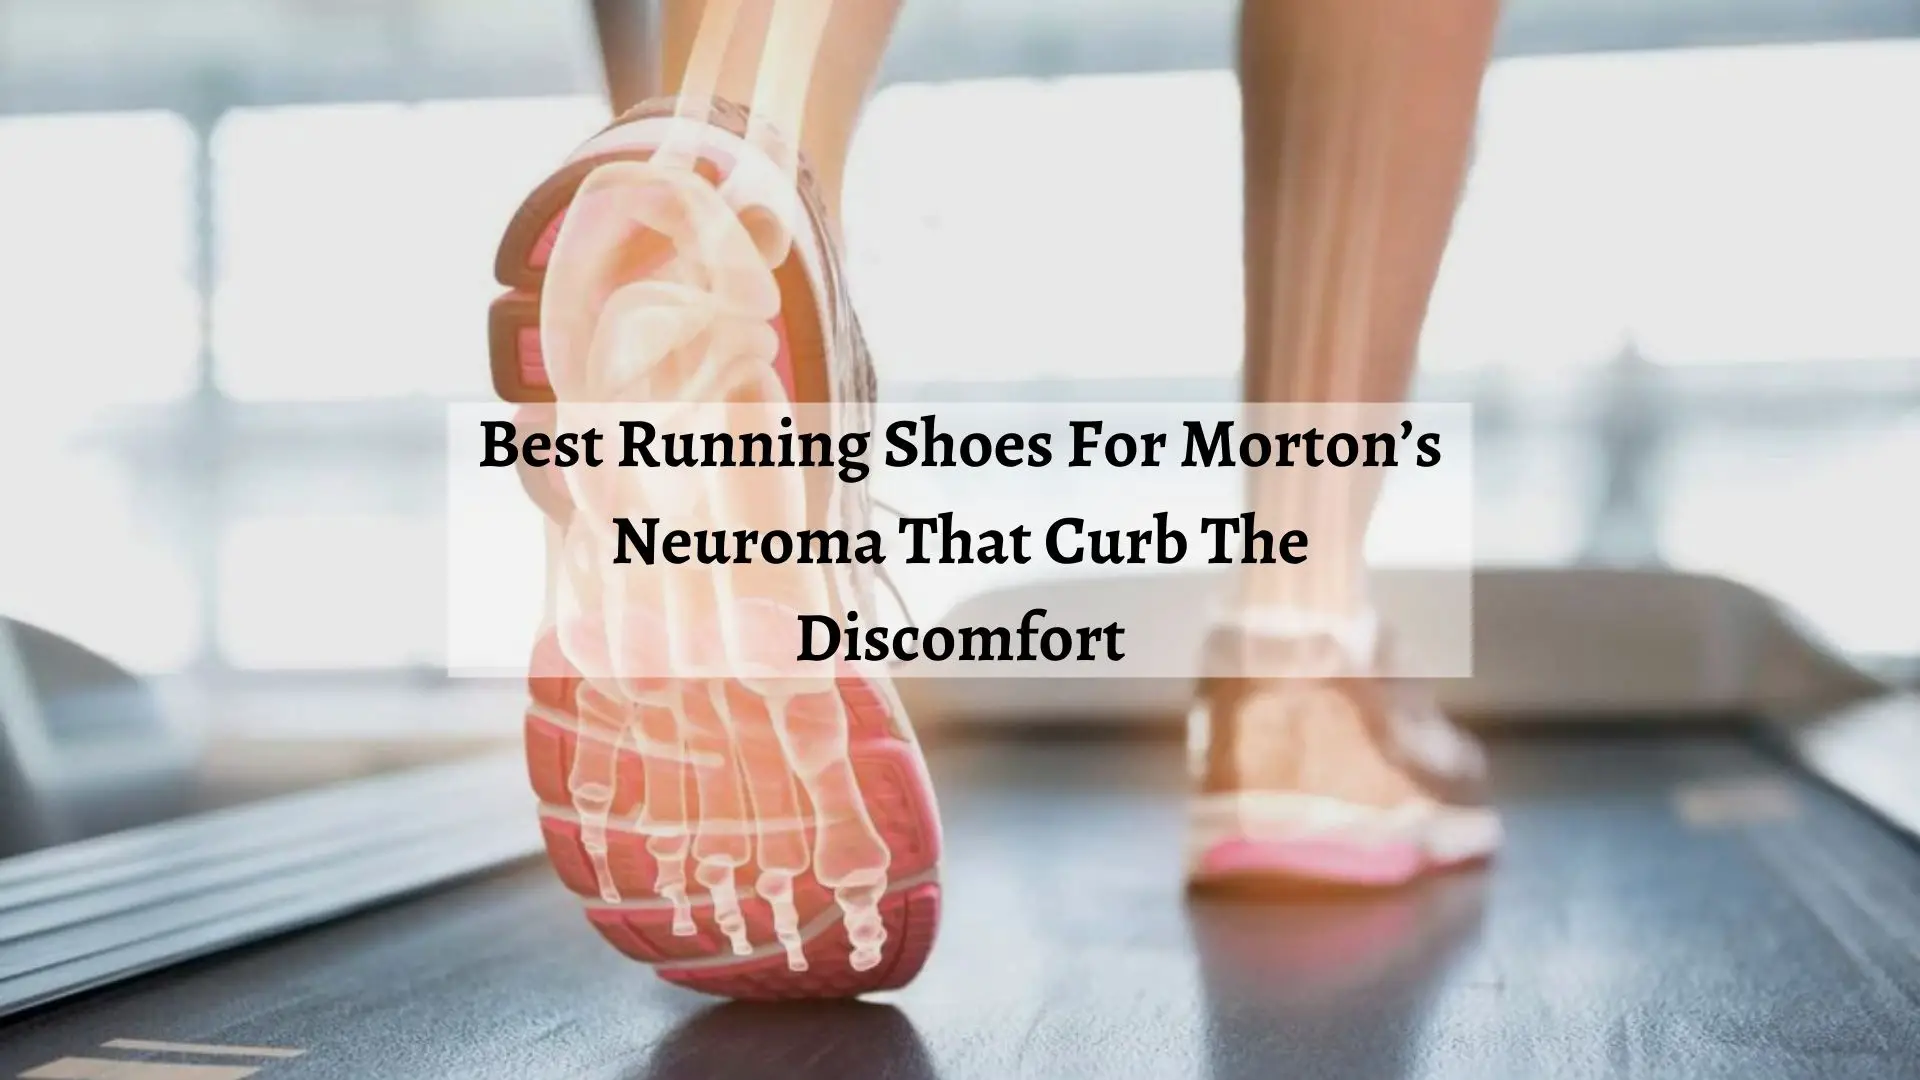 8 Best Running Shoes For Morton’s Toe/Neuroma That Curb The Discomfort ...